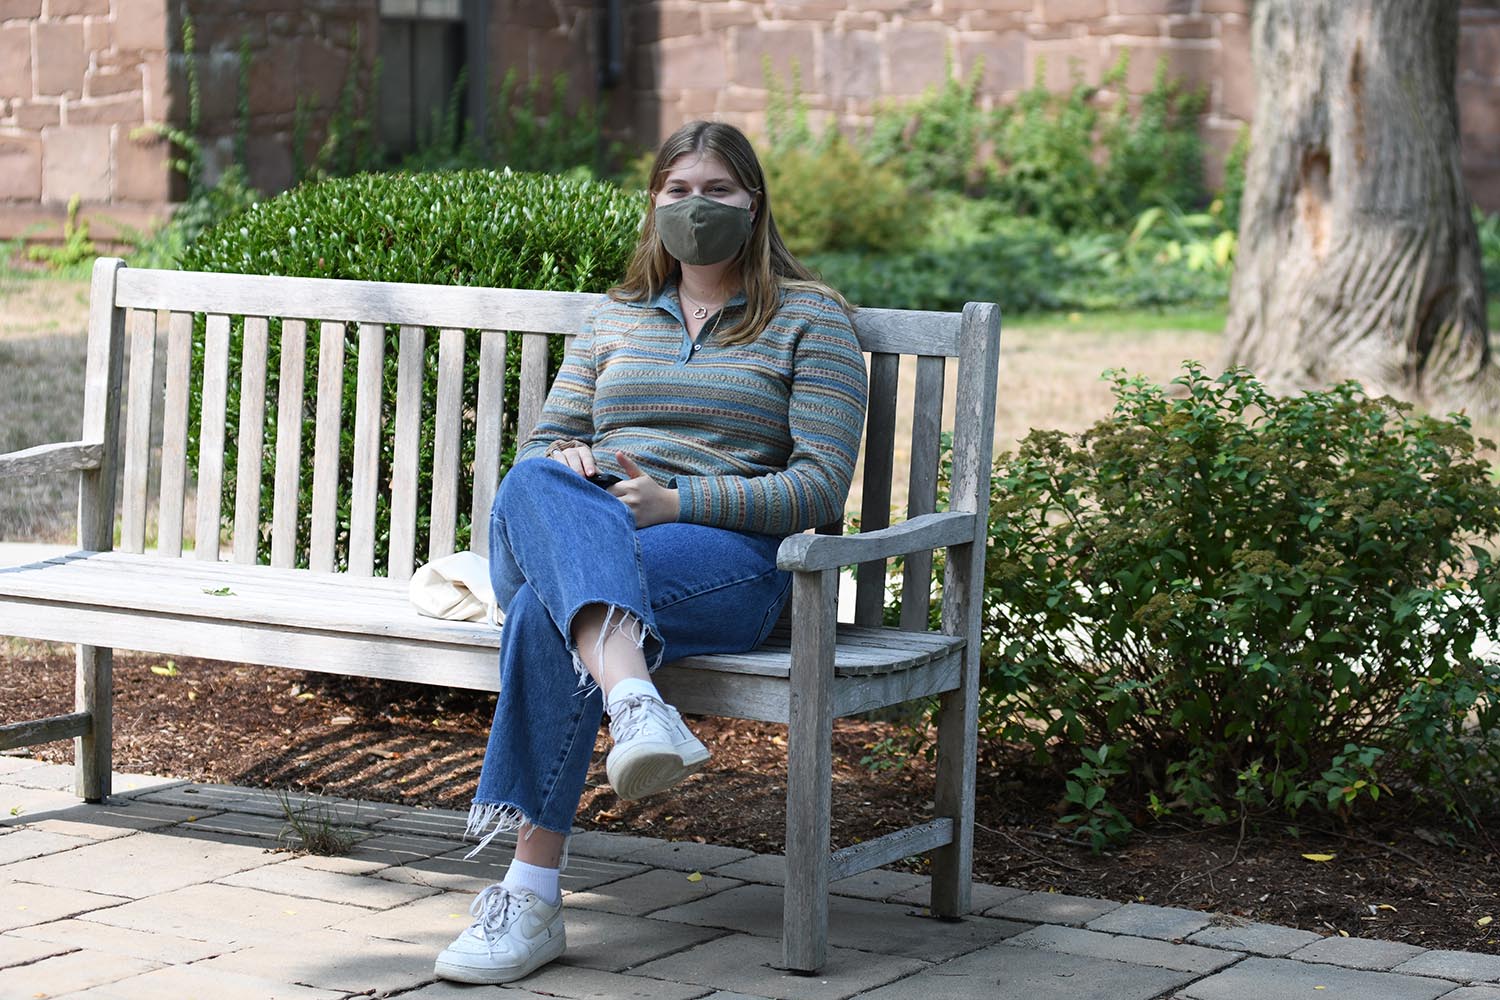 Students are required to wear masks in all public spaces.